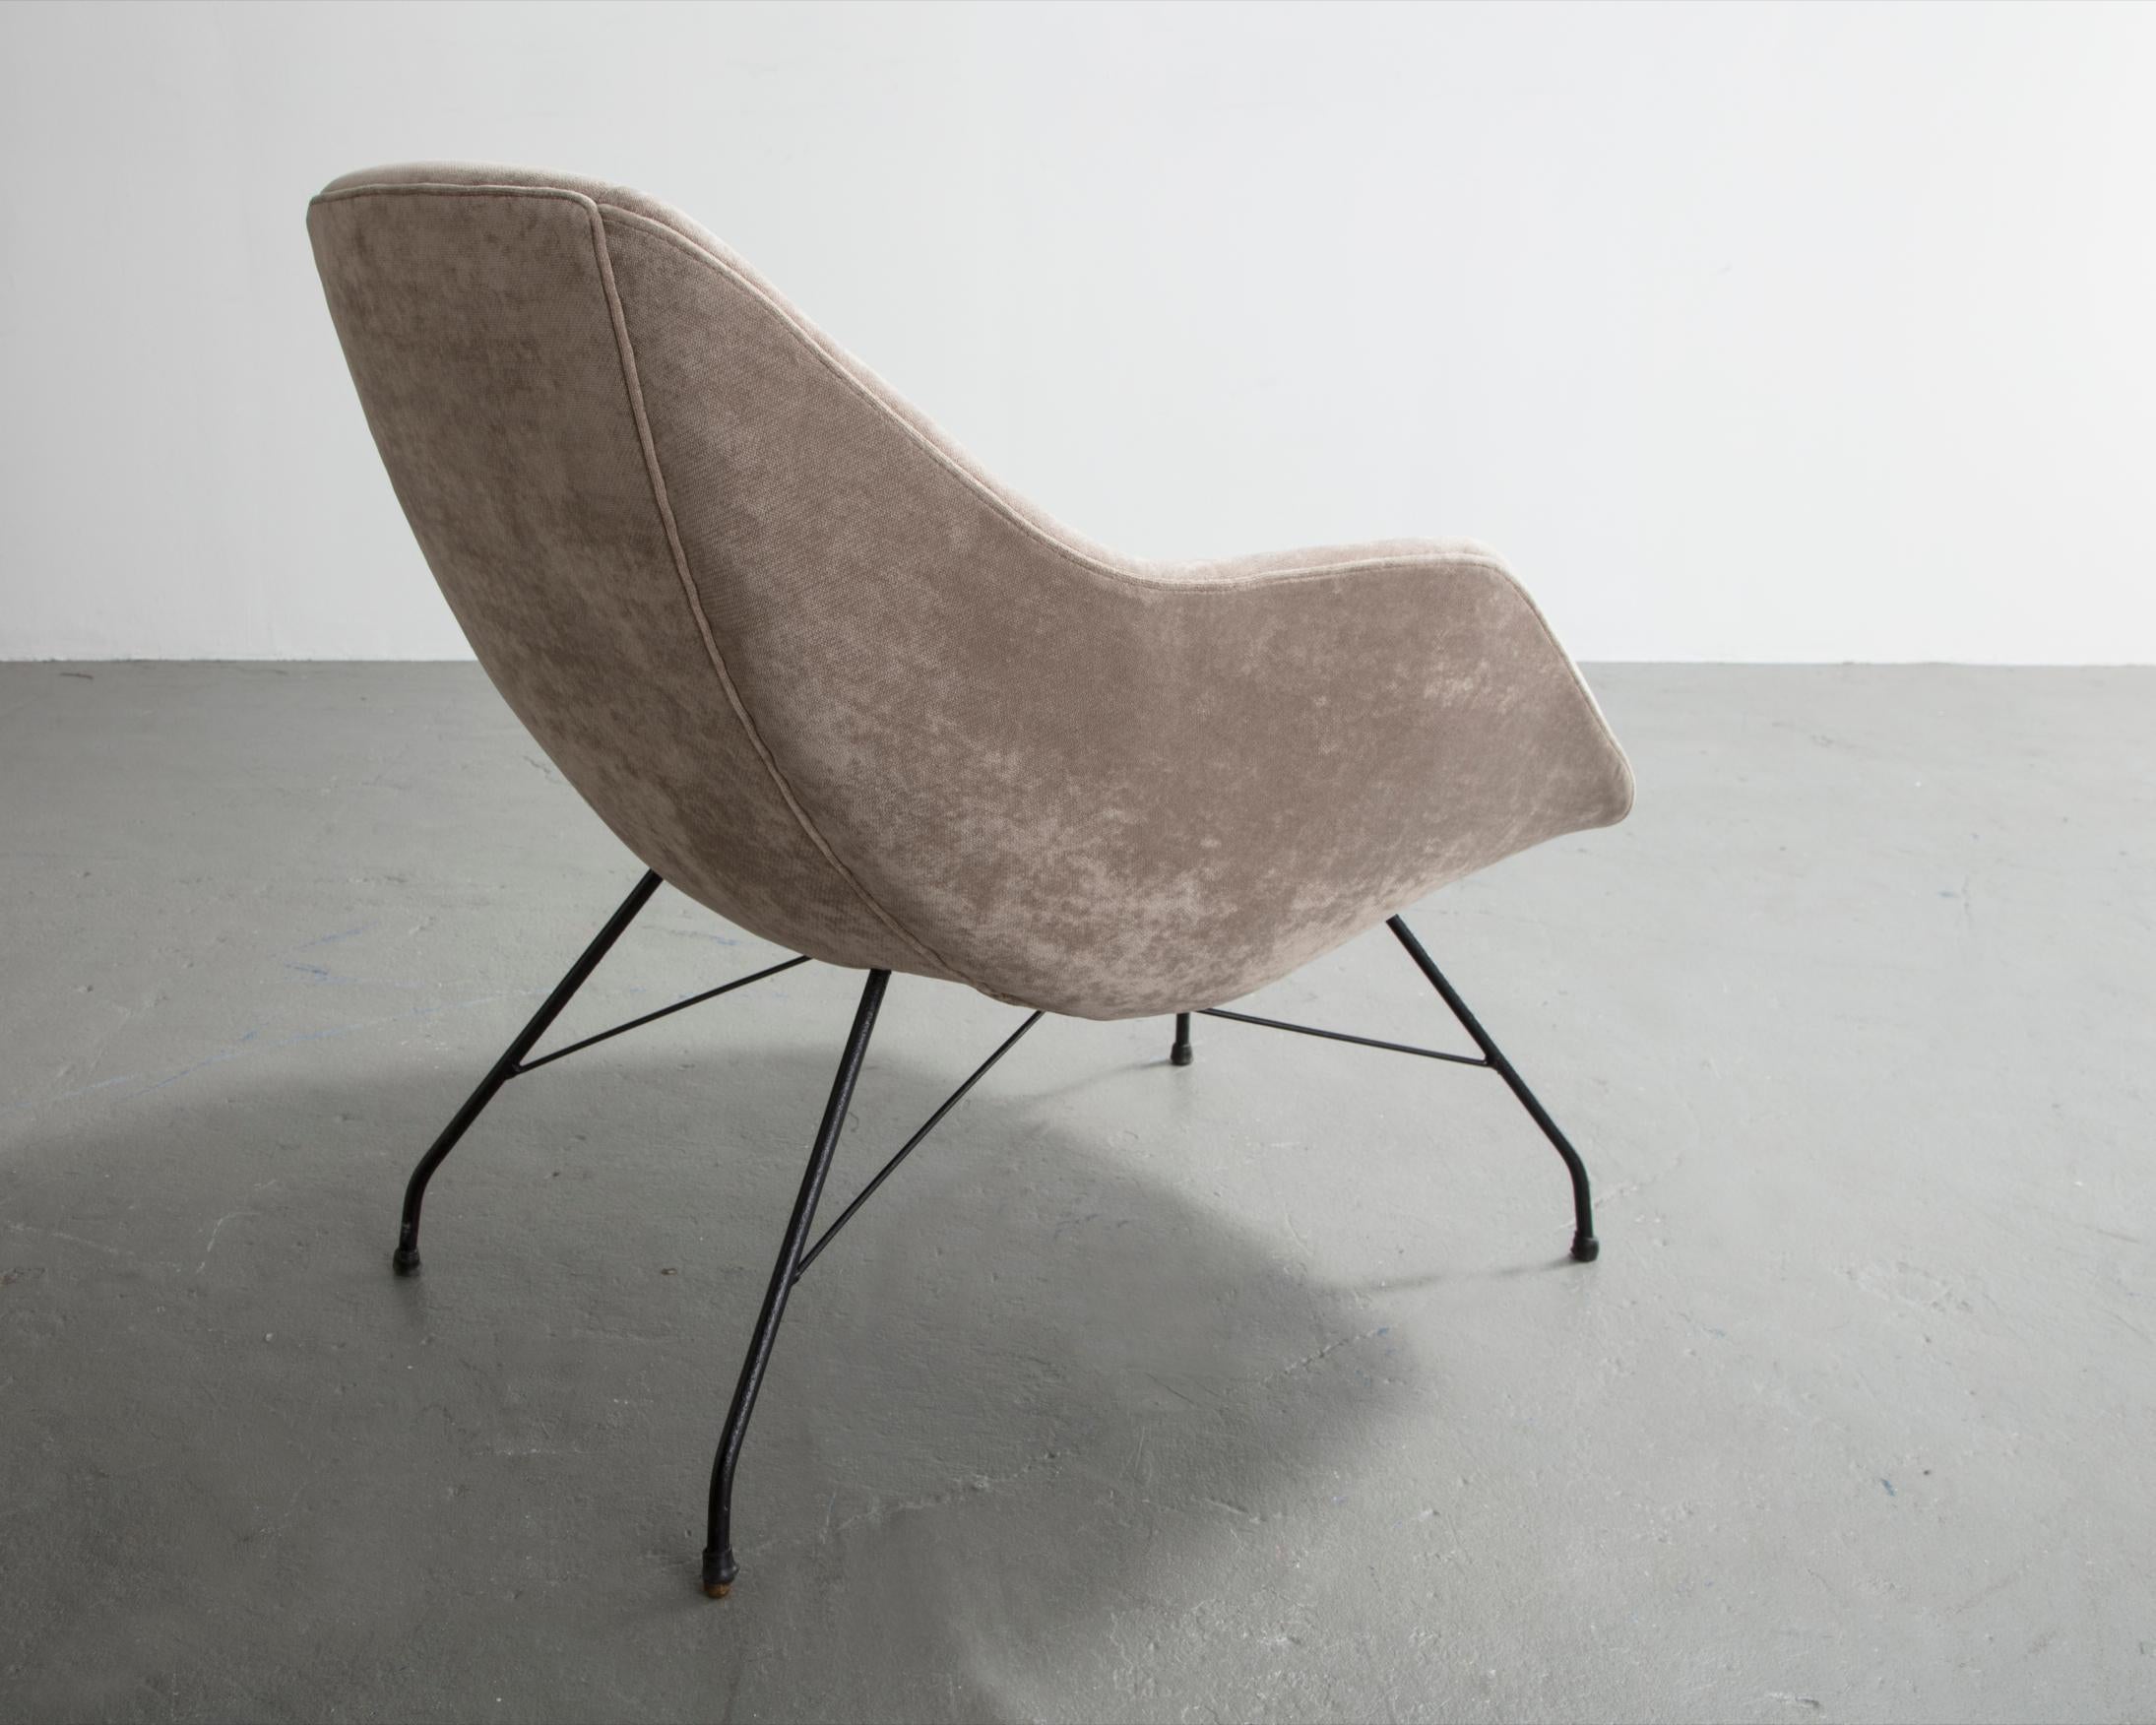 Lounge chair in upholstery with metal frame. Designed by Carlo Hauner for Forma, Brazil, 1960s.